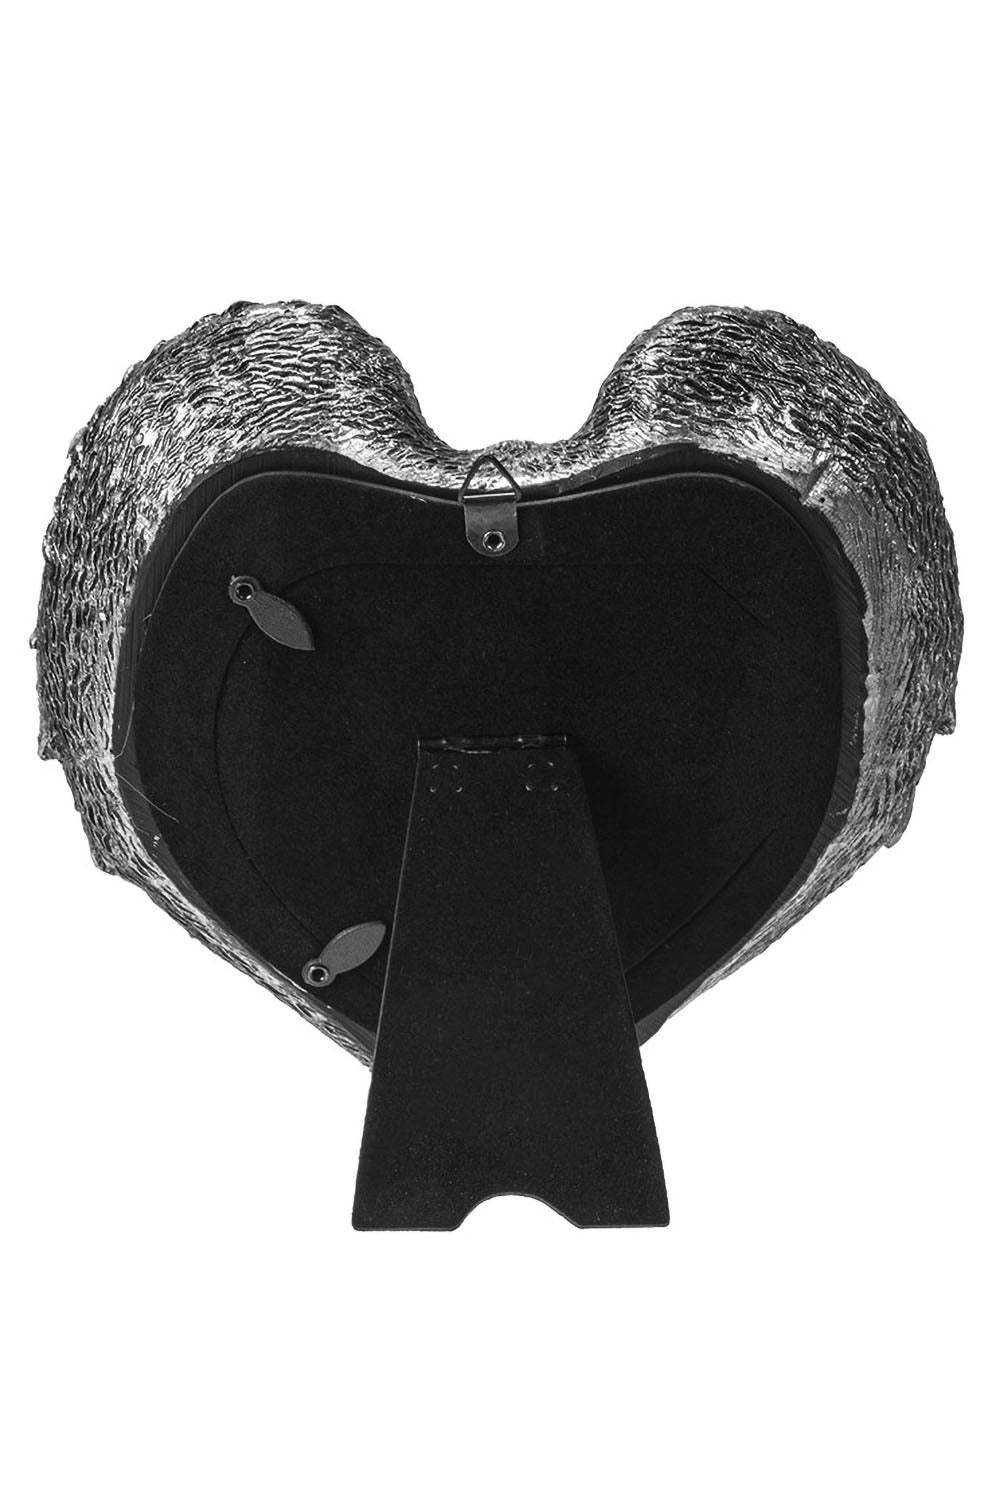 Winged Heart Picture Frame